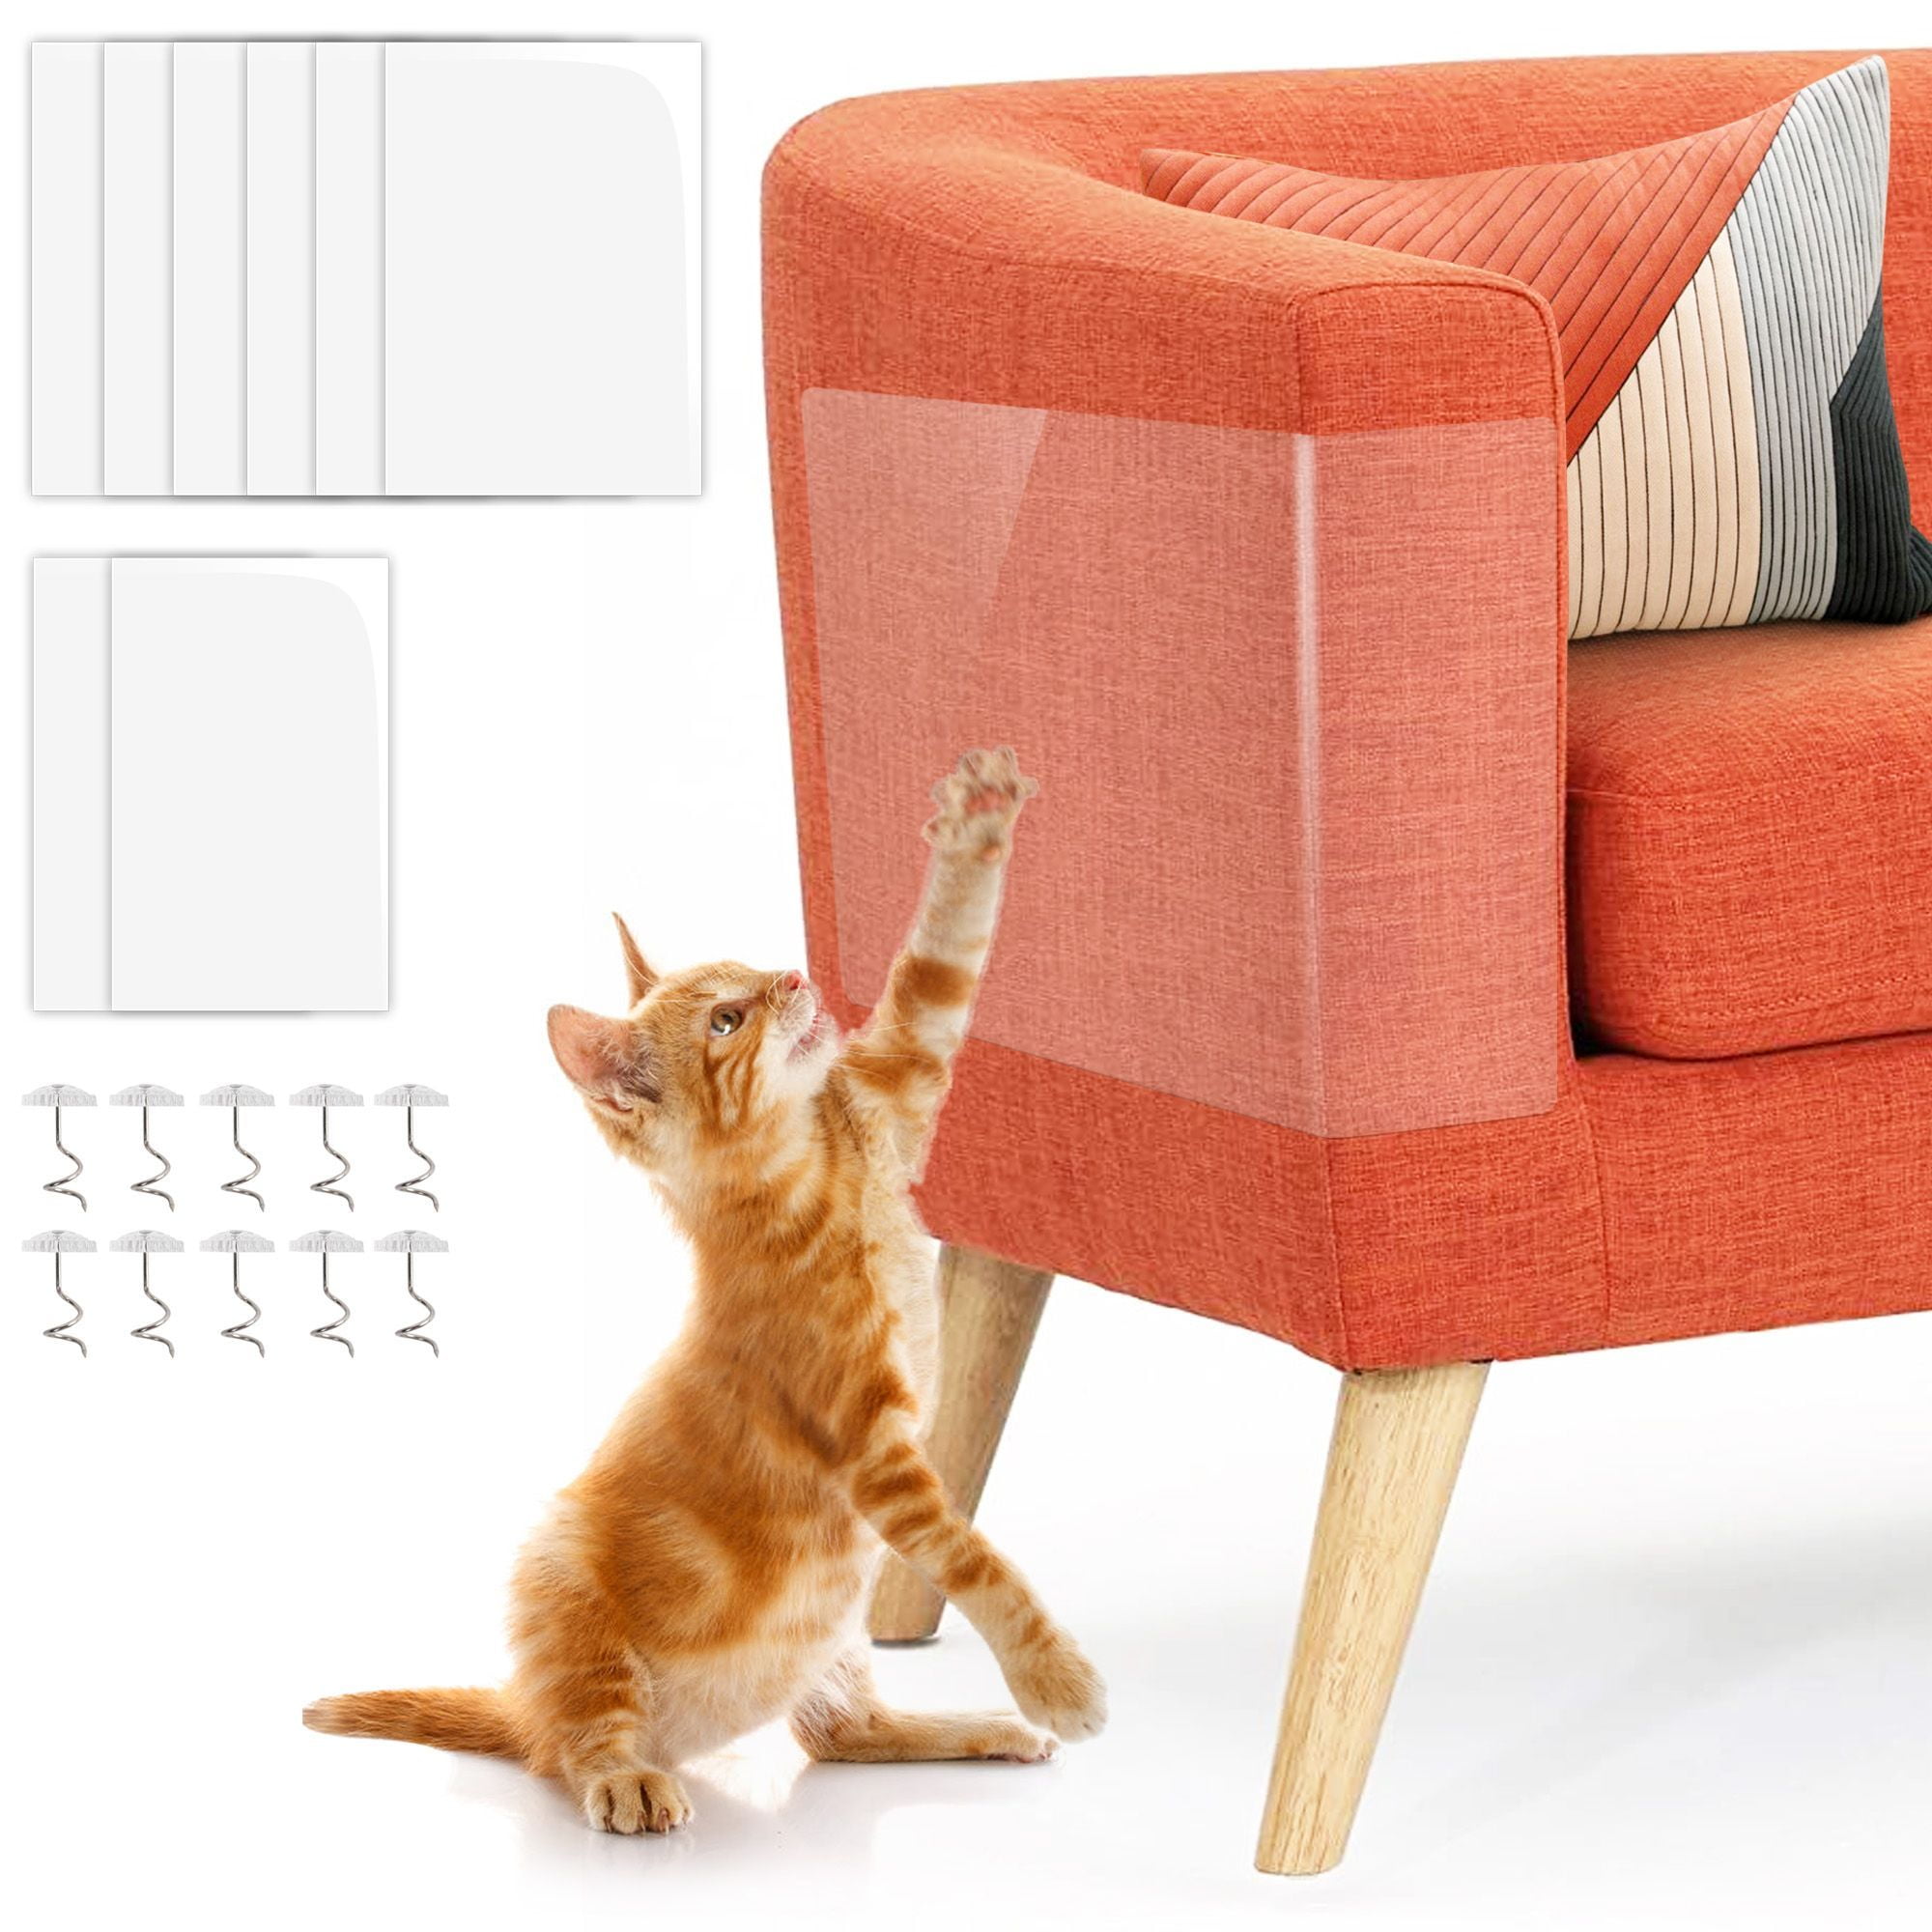 4pcs/lot Couch Cat Scratcher Tape Sofa Furniture Protector for